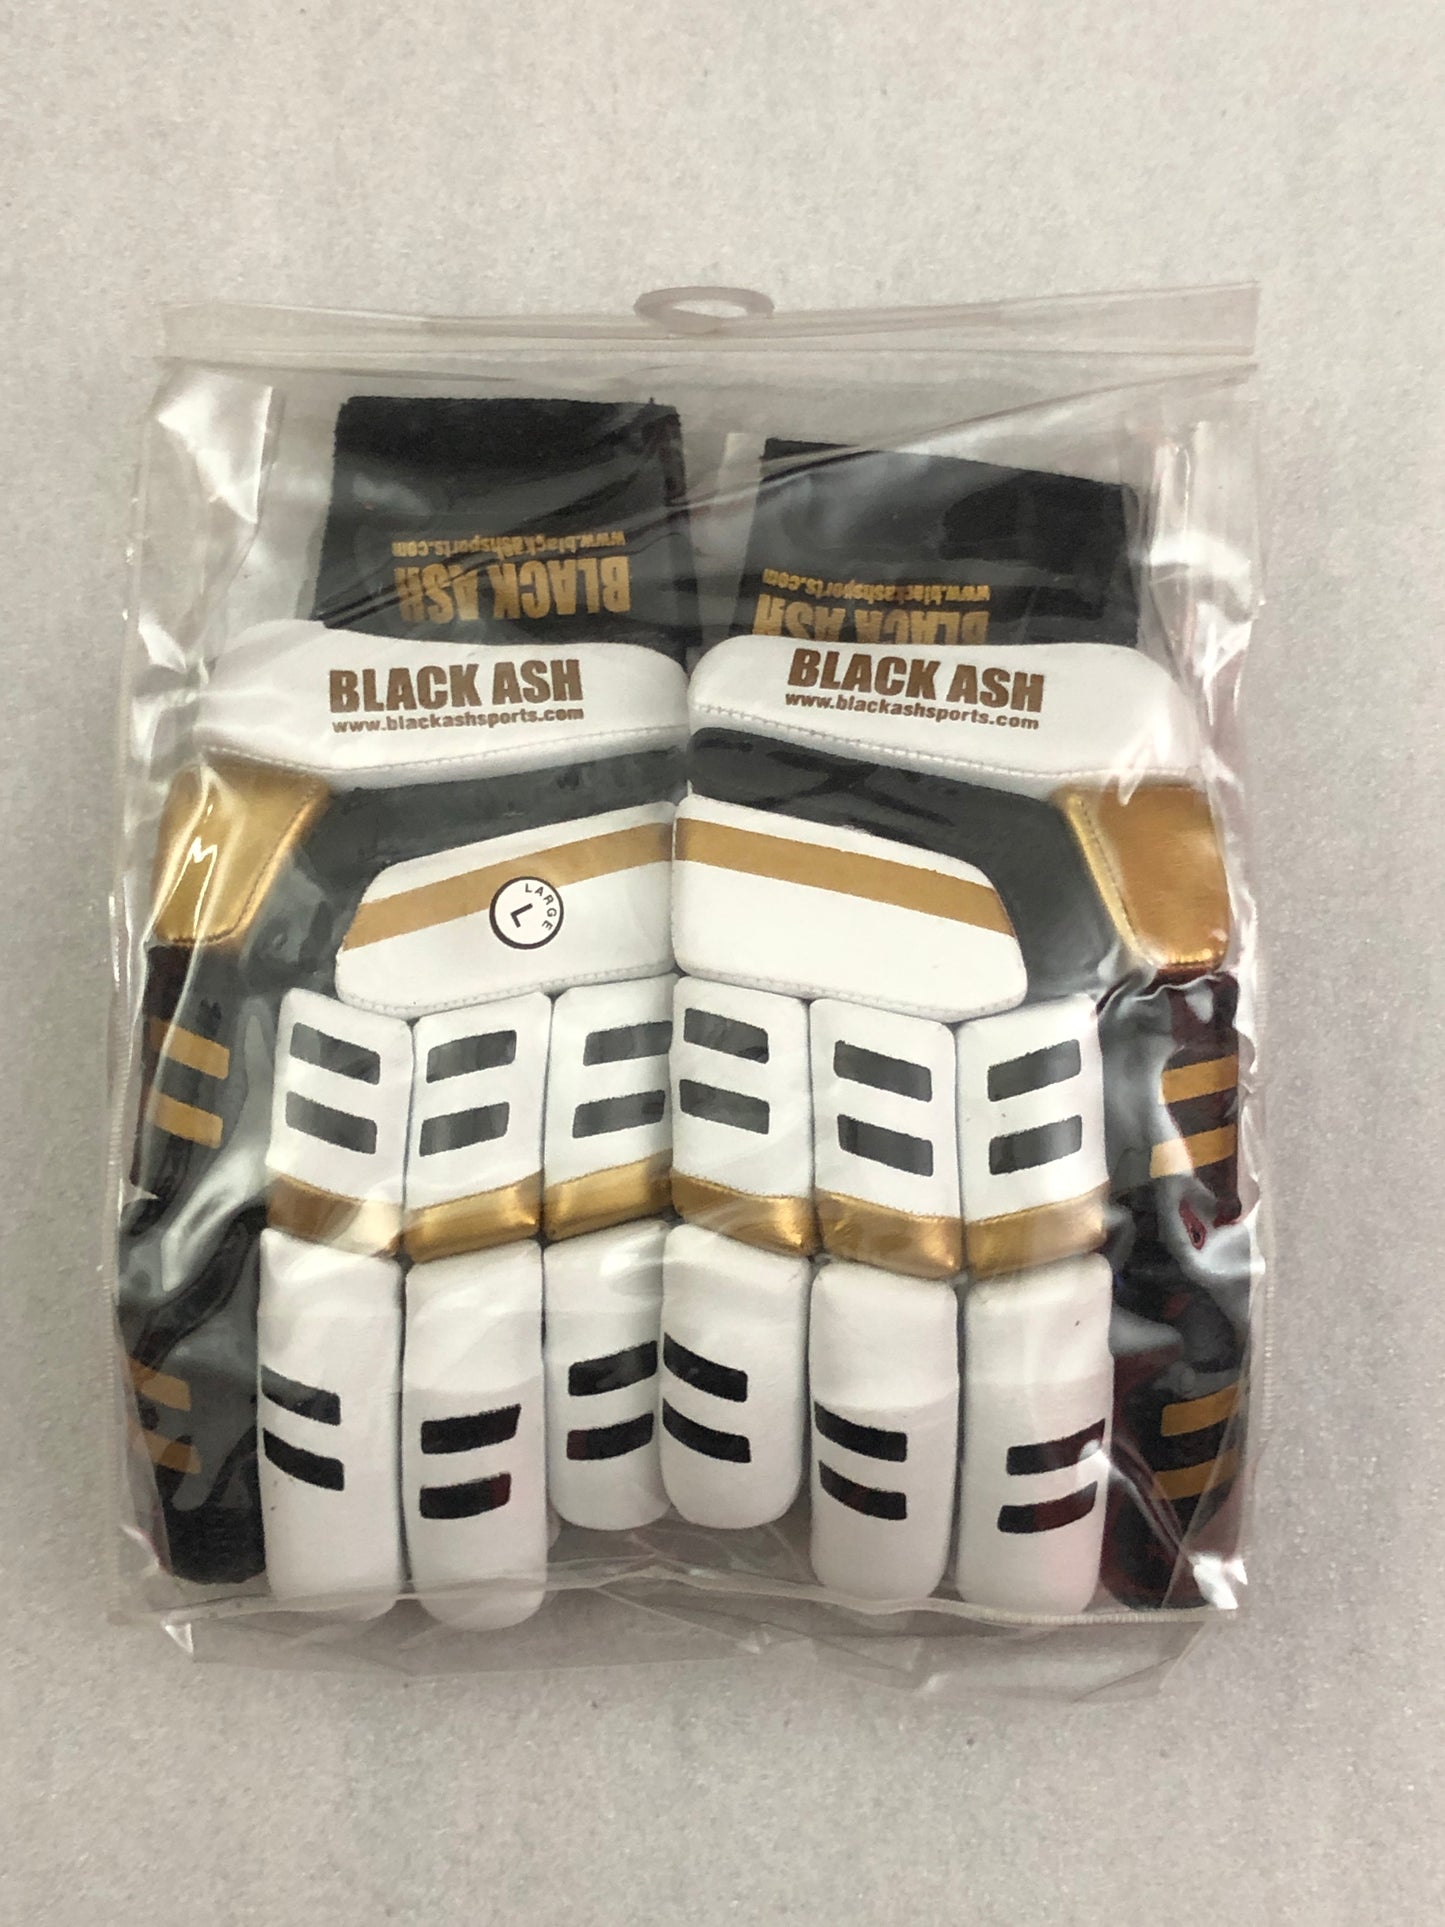 White/Gold Cricket Batting Gloves by Black Ash, with light-weight high-density foam, strong inserts in fingers for added protection, full leather palm and thumb, two-piece thumb for comfort, in white and gold.